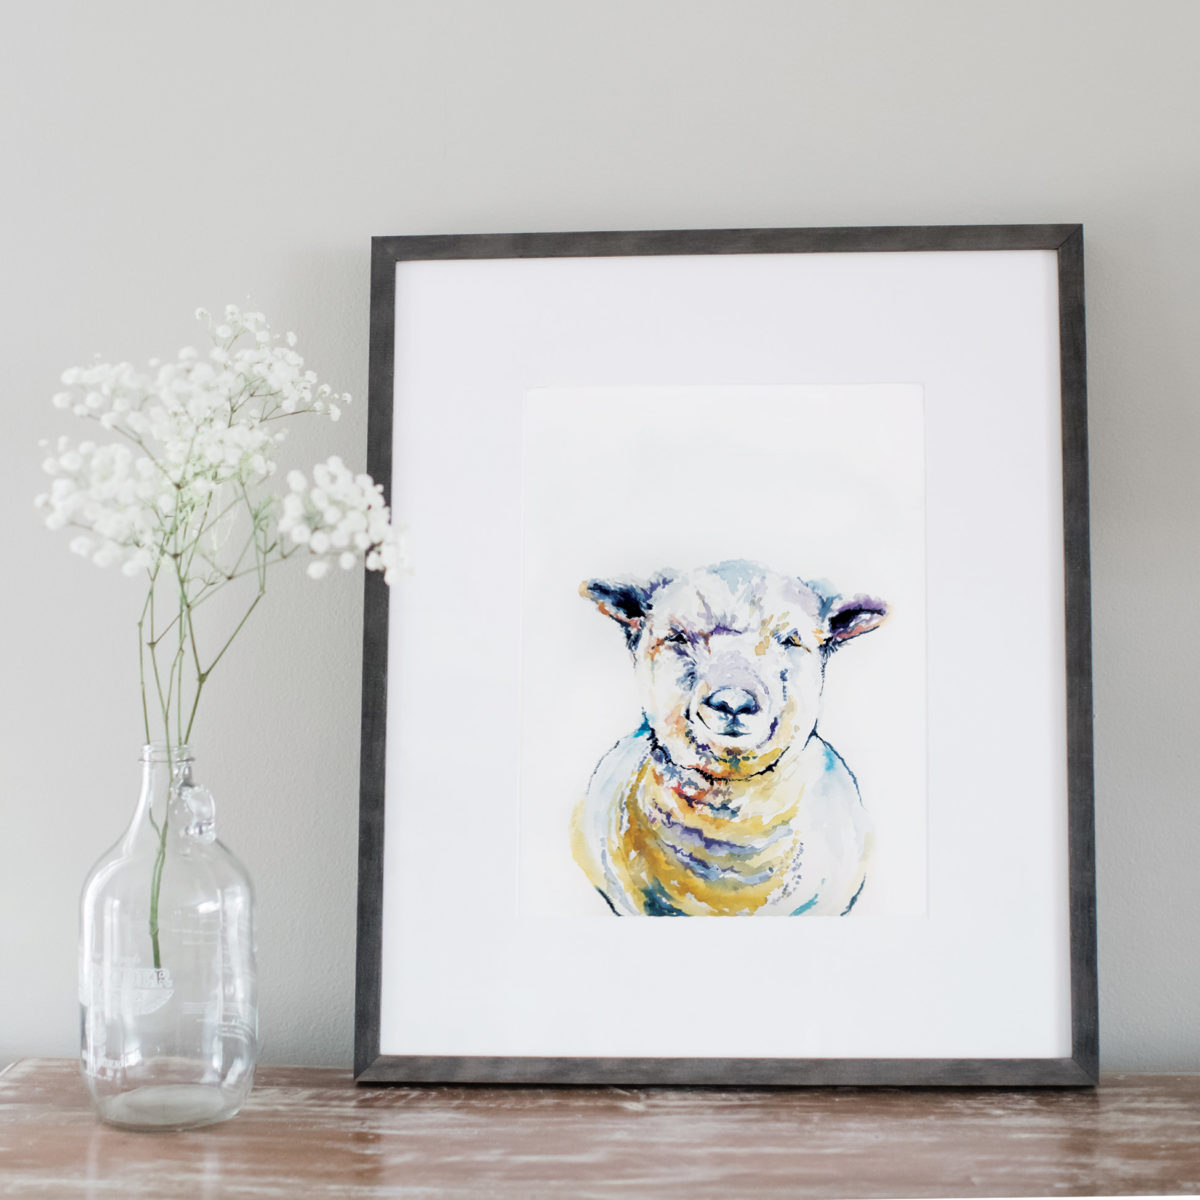 Watercolor of a sheep framed next to flowers